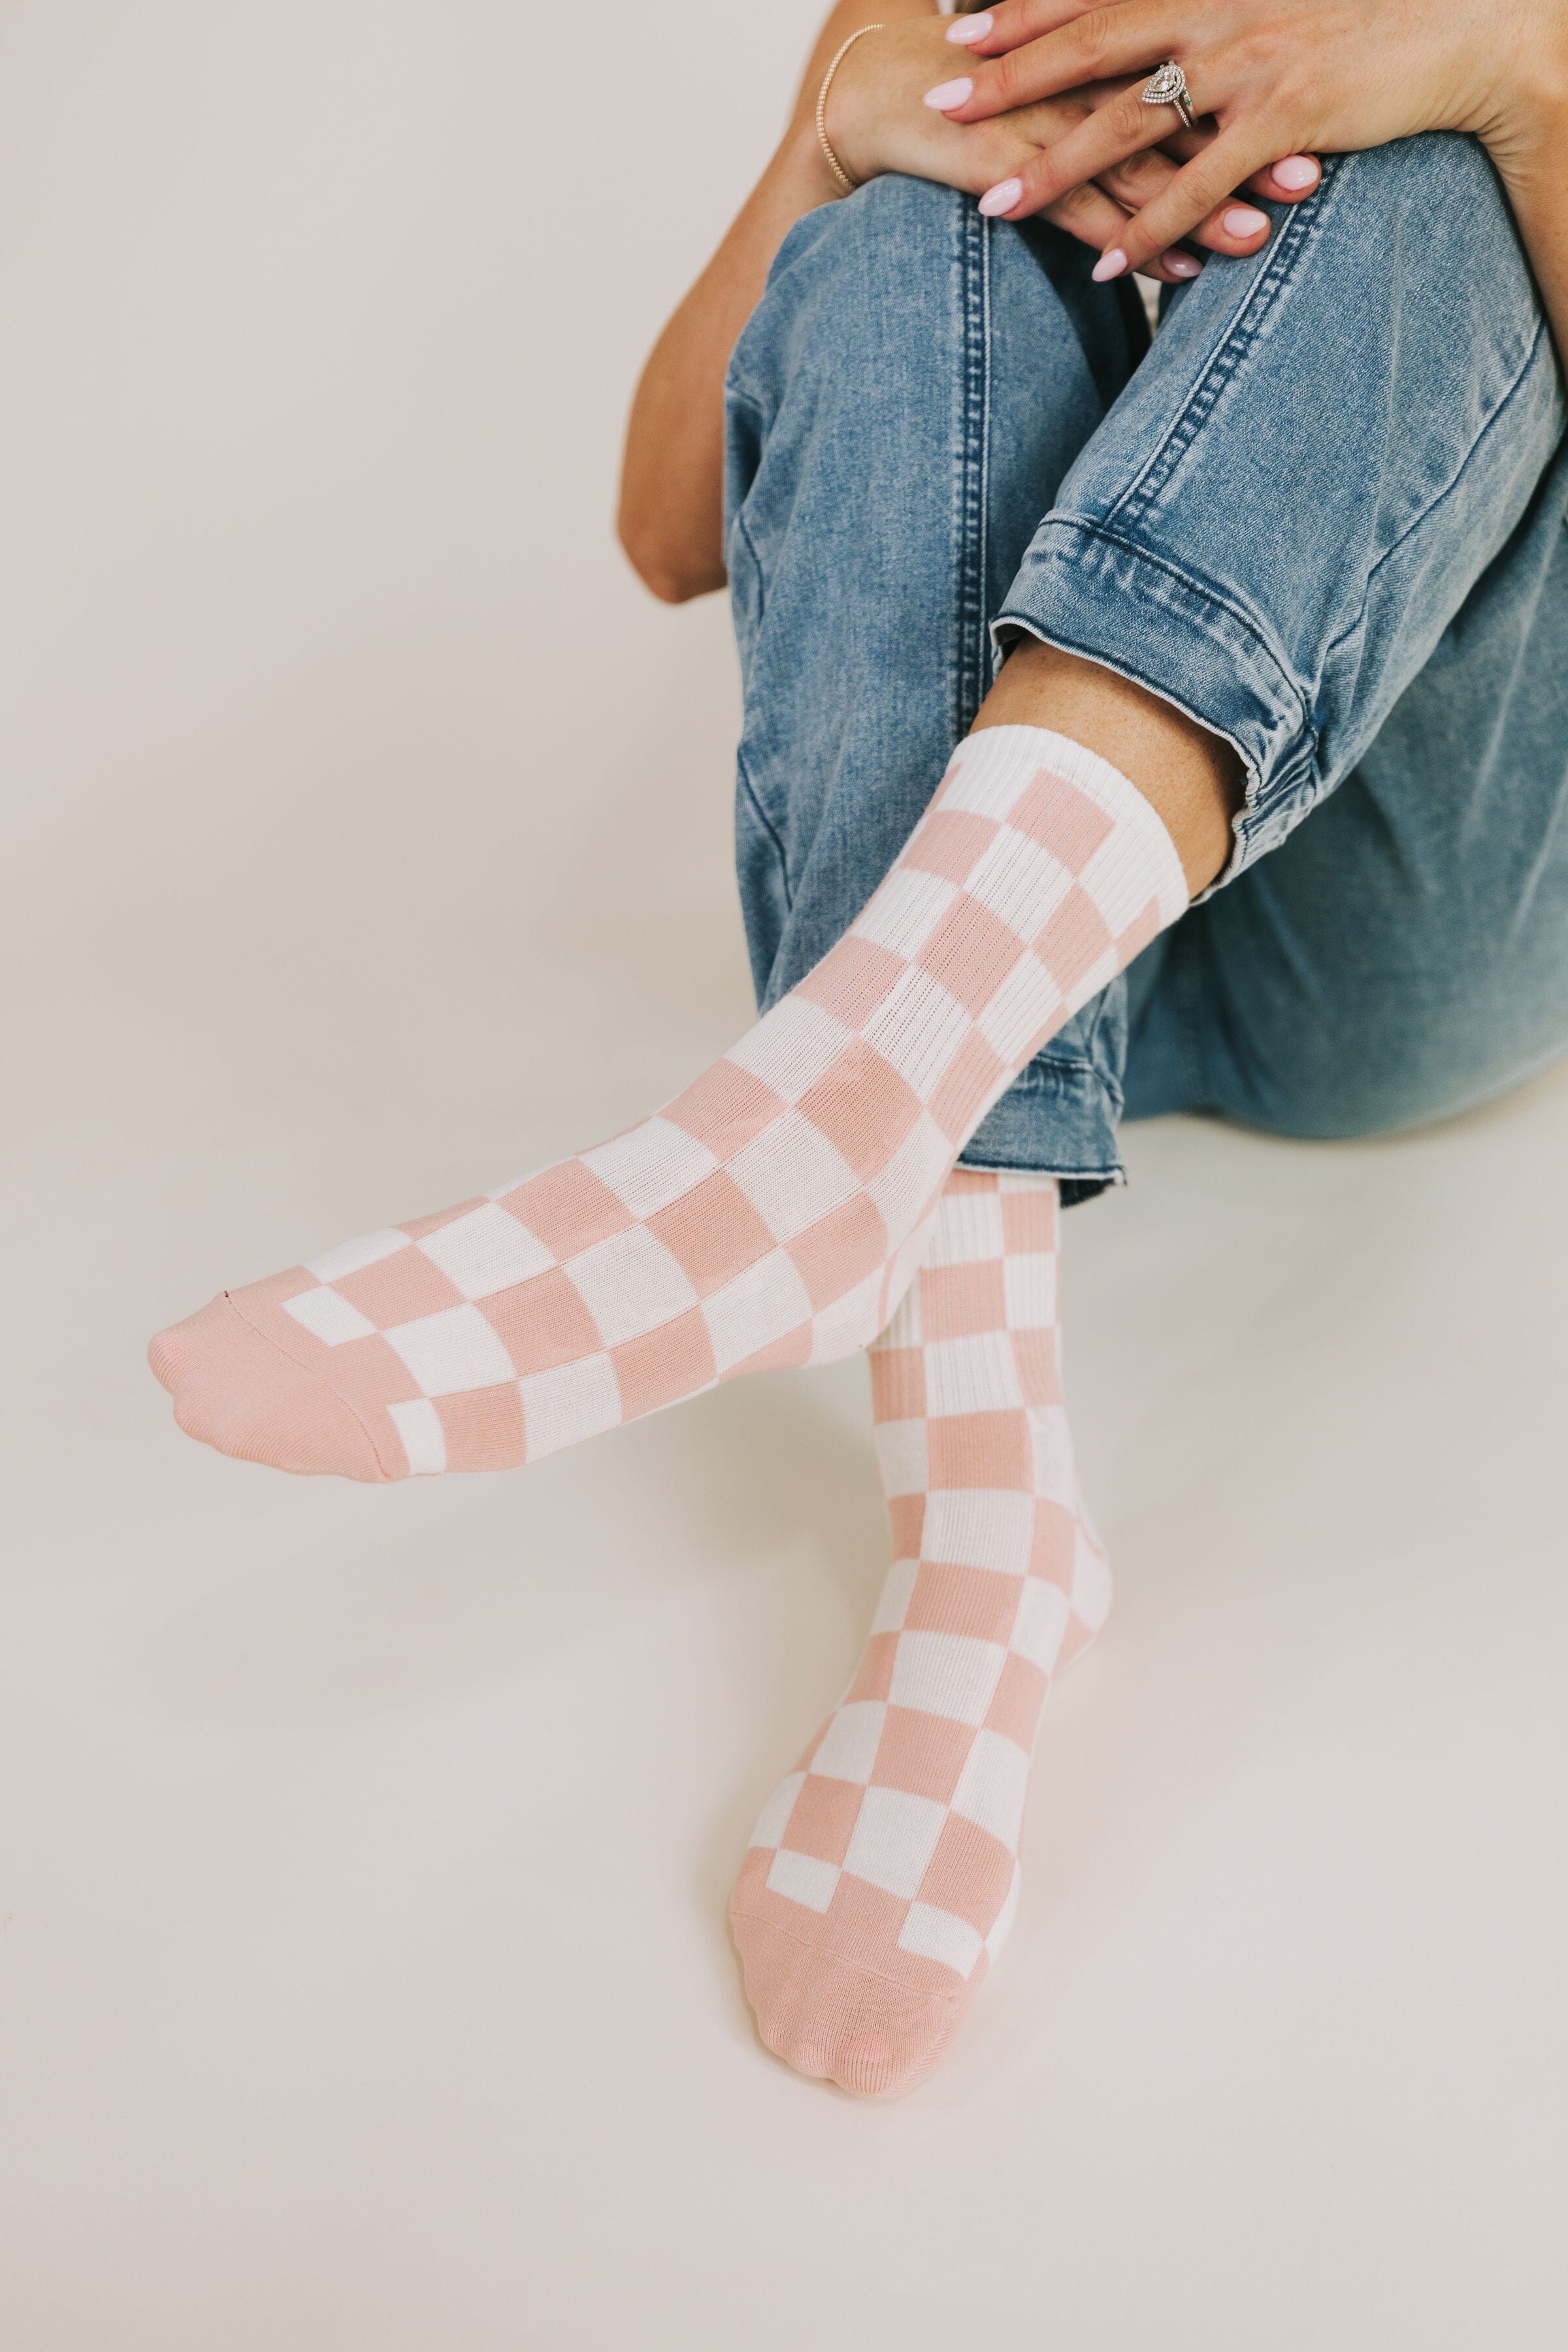 POLKA DOTS + WHITE JEANS - A Touch of Pink